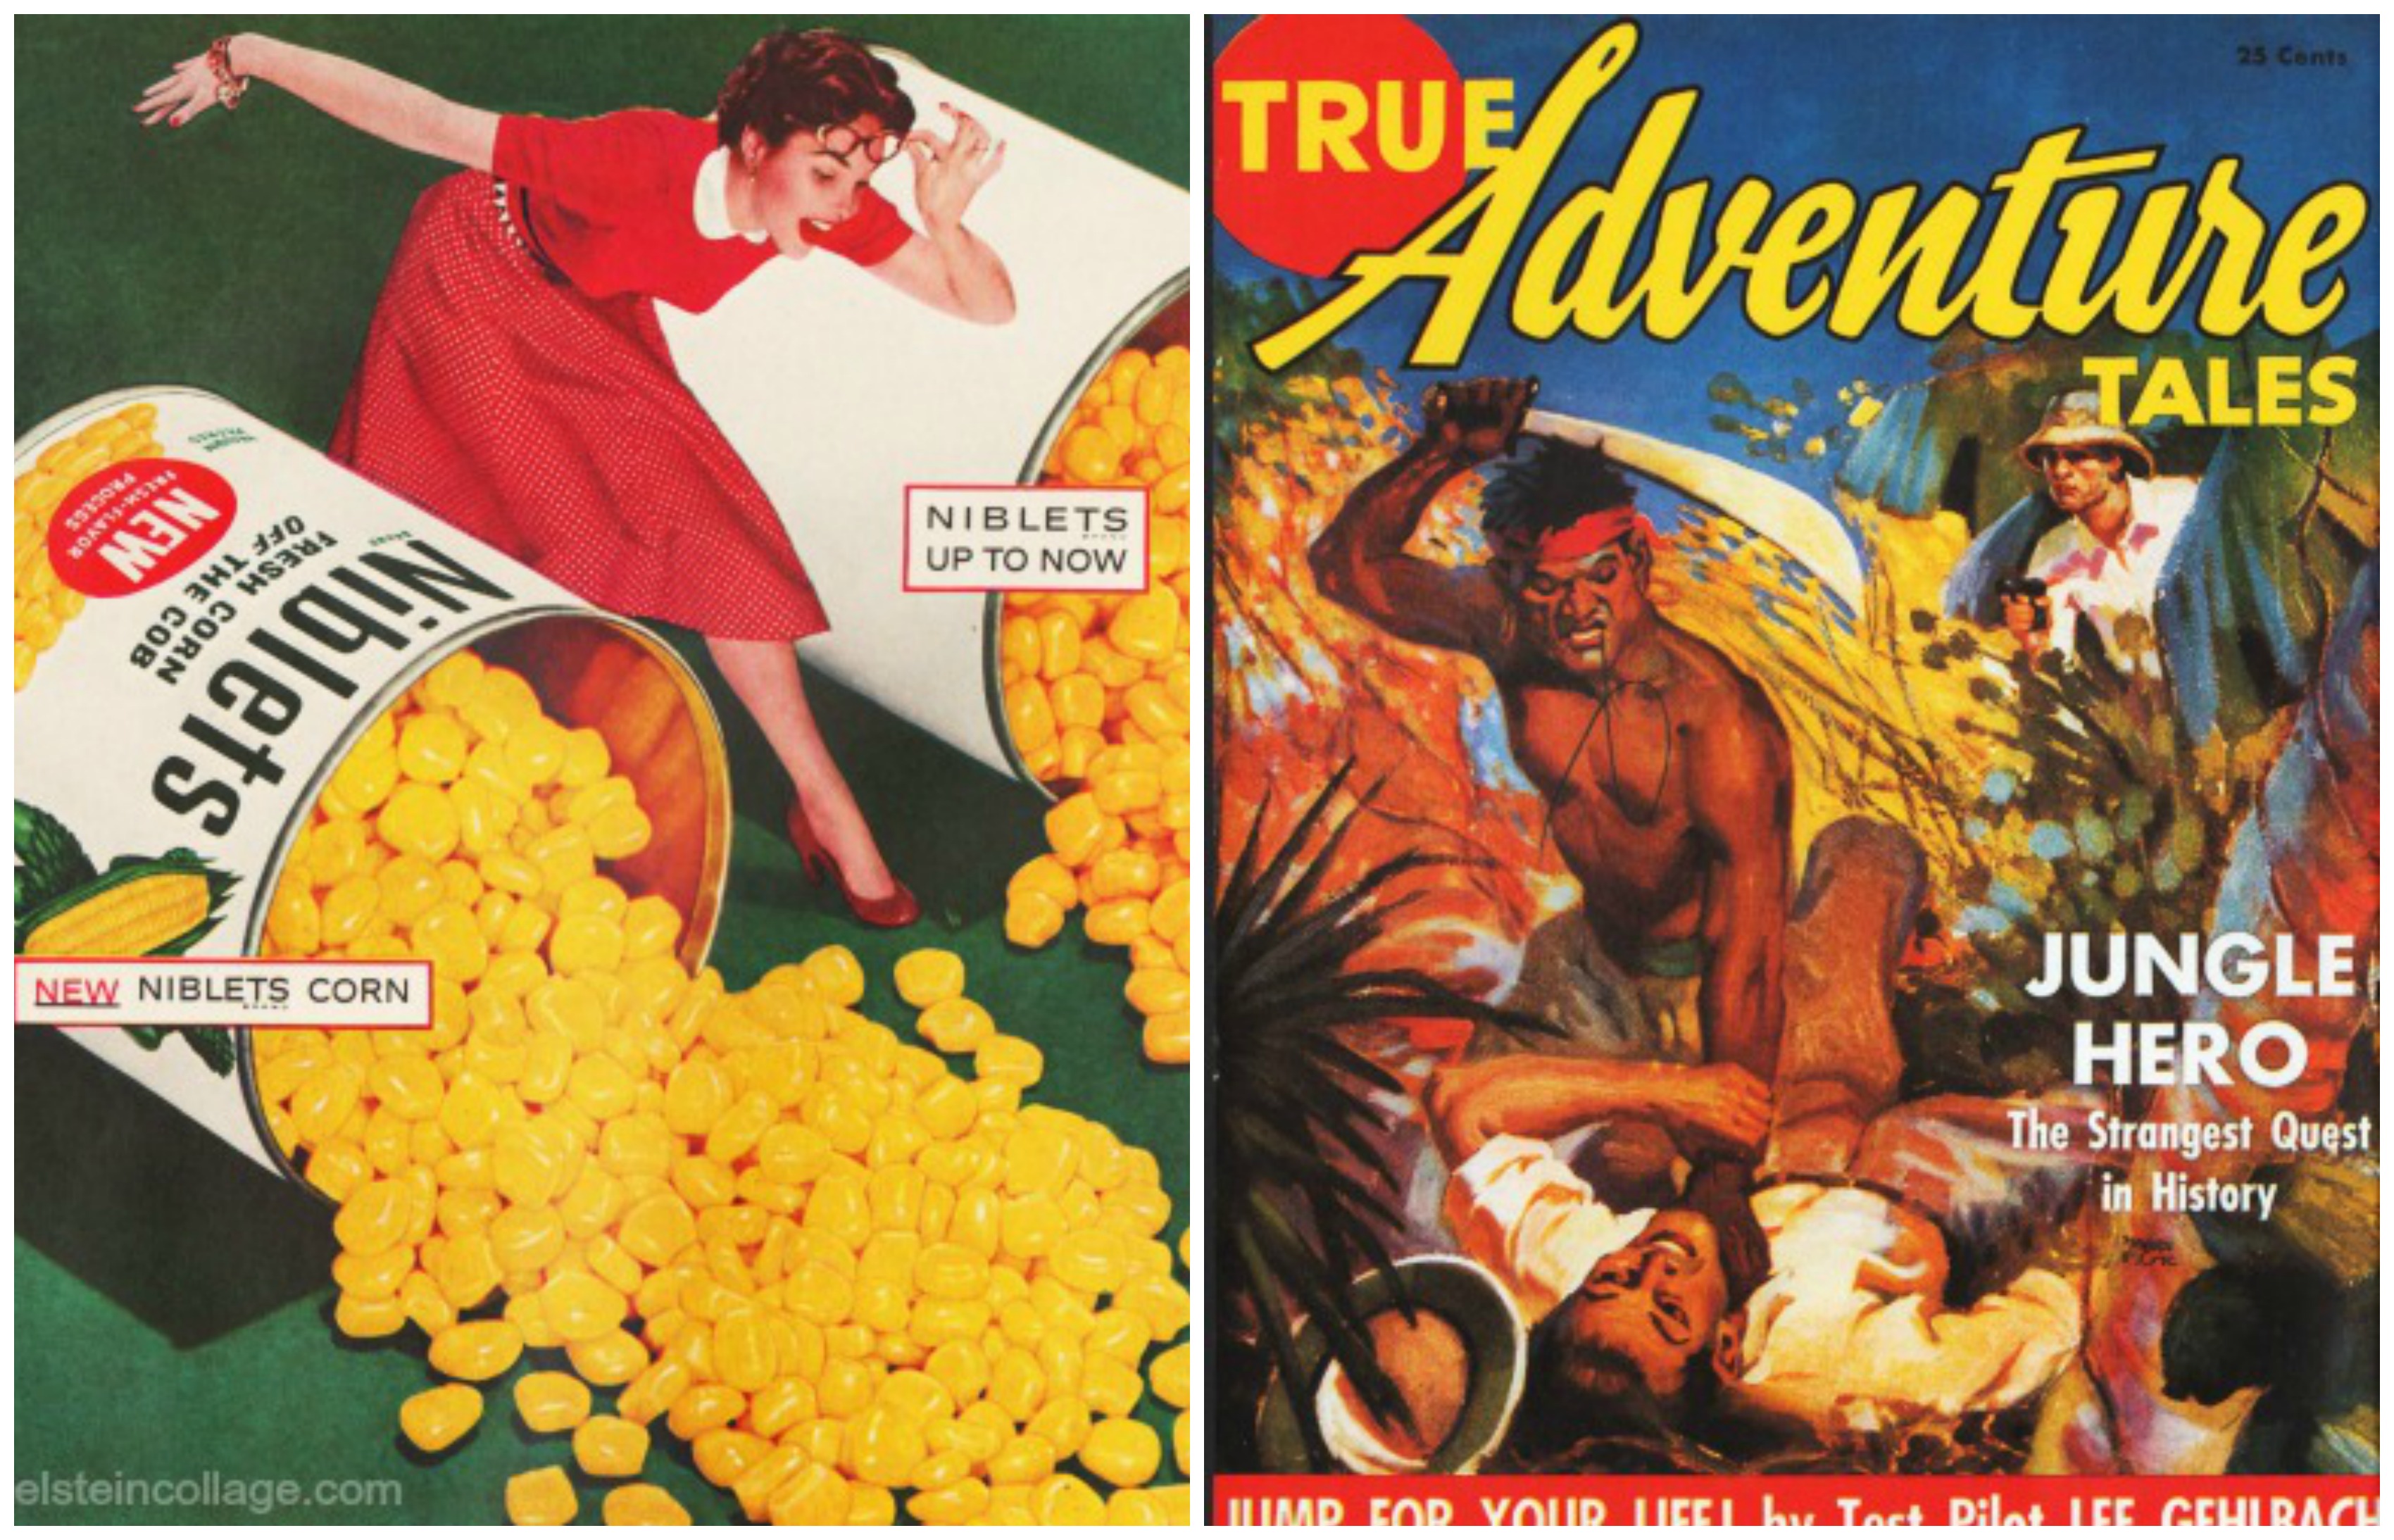 Adventures magazine. You are about to be crushed by a Glandt Corn.